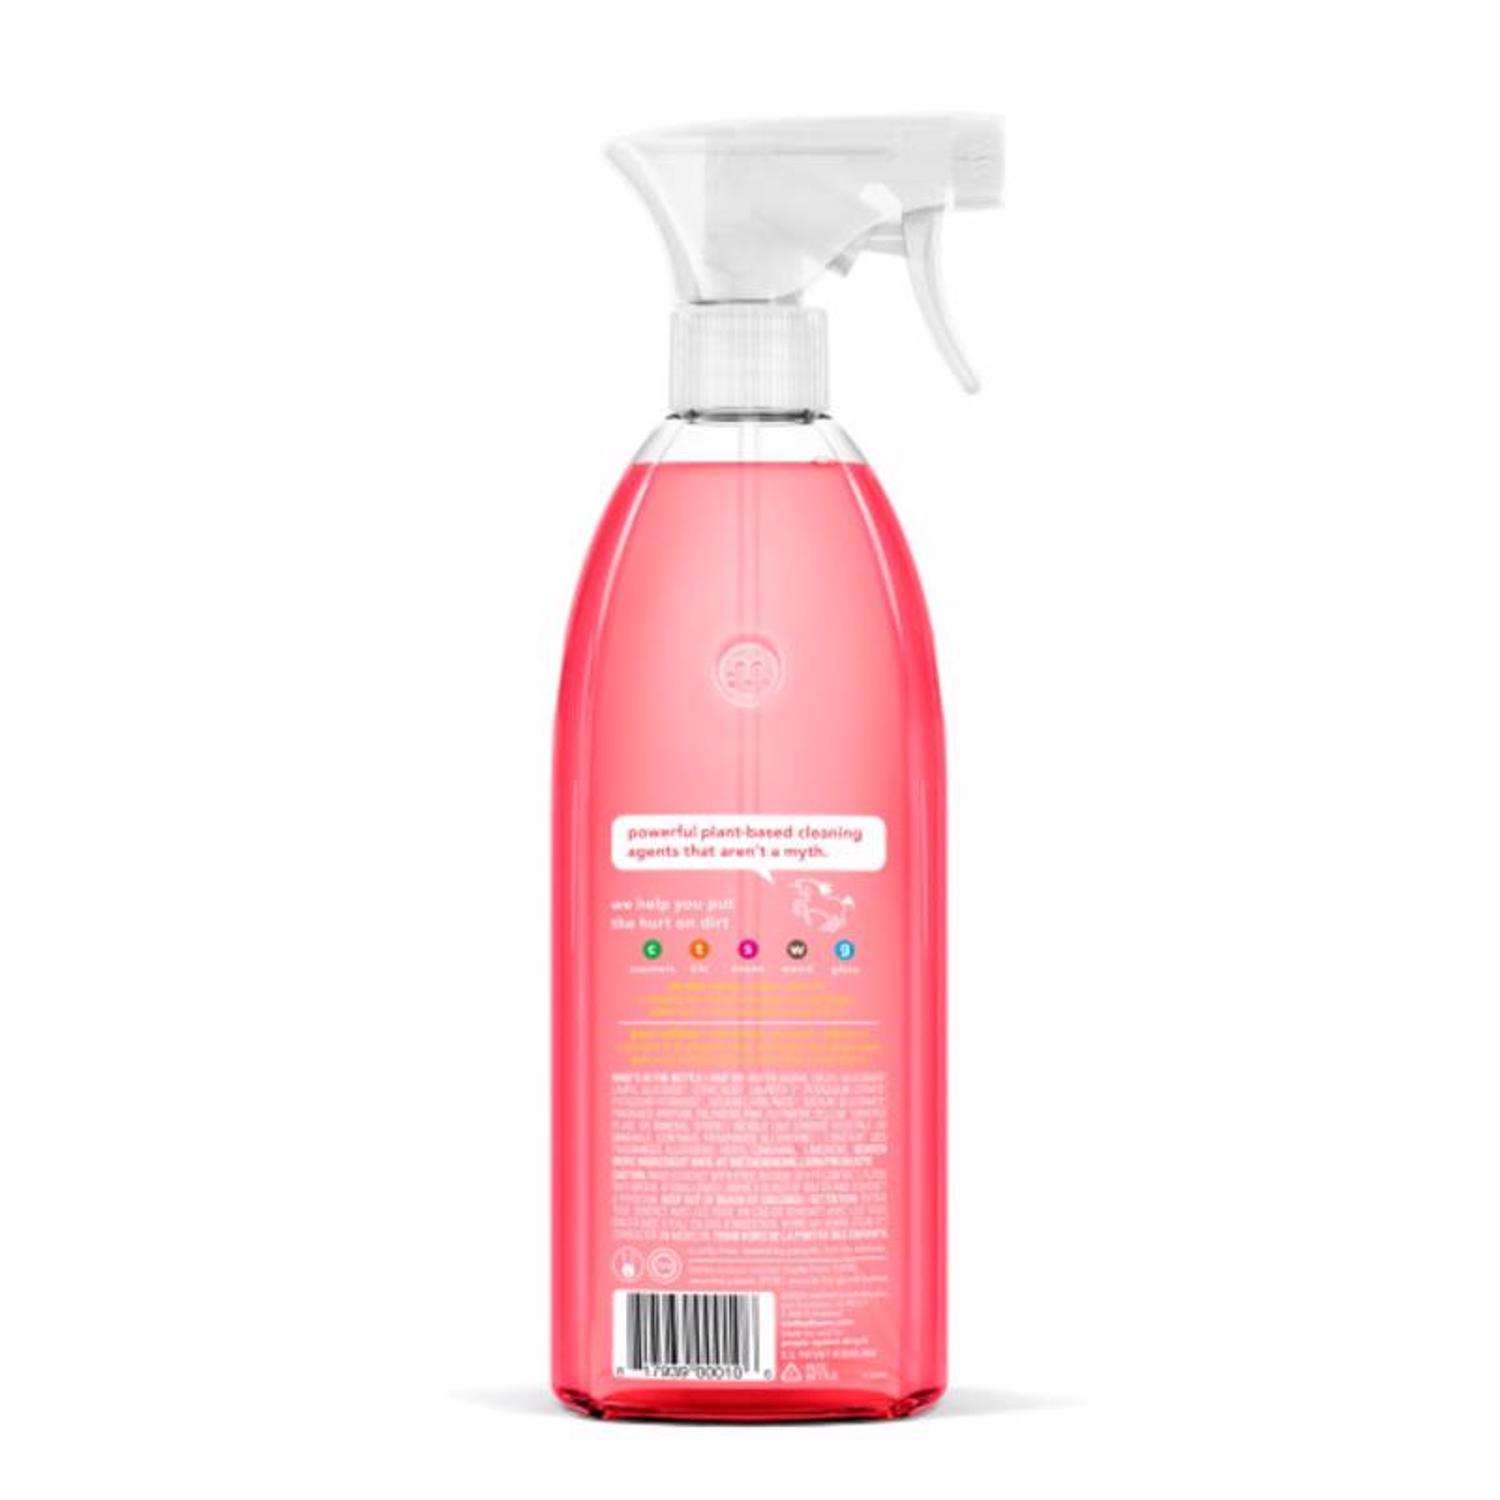 ACE Hardware Palm Springs - Think Pink! New Pink Stuff cleaners are vegan  and made from 99% naturally derived ingredients. @cleanwithpinkstuff is  available in Cream Cleaner, Cleaning Paste and Bathroom Foam Cleaner. #